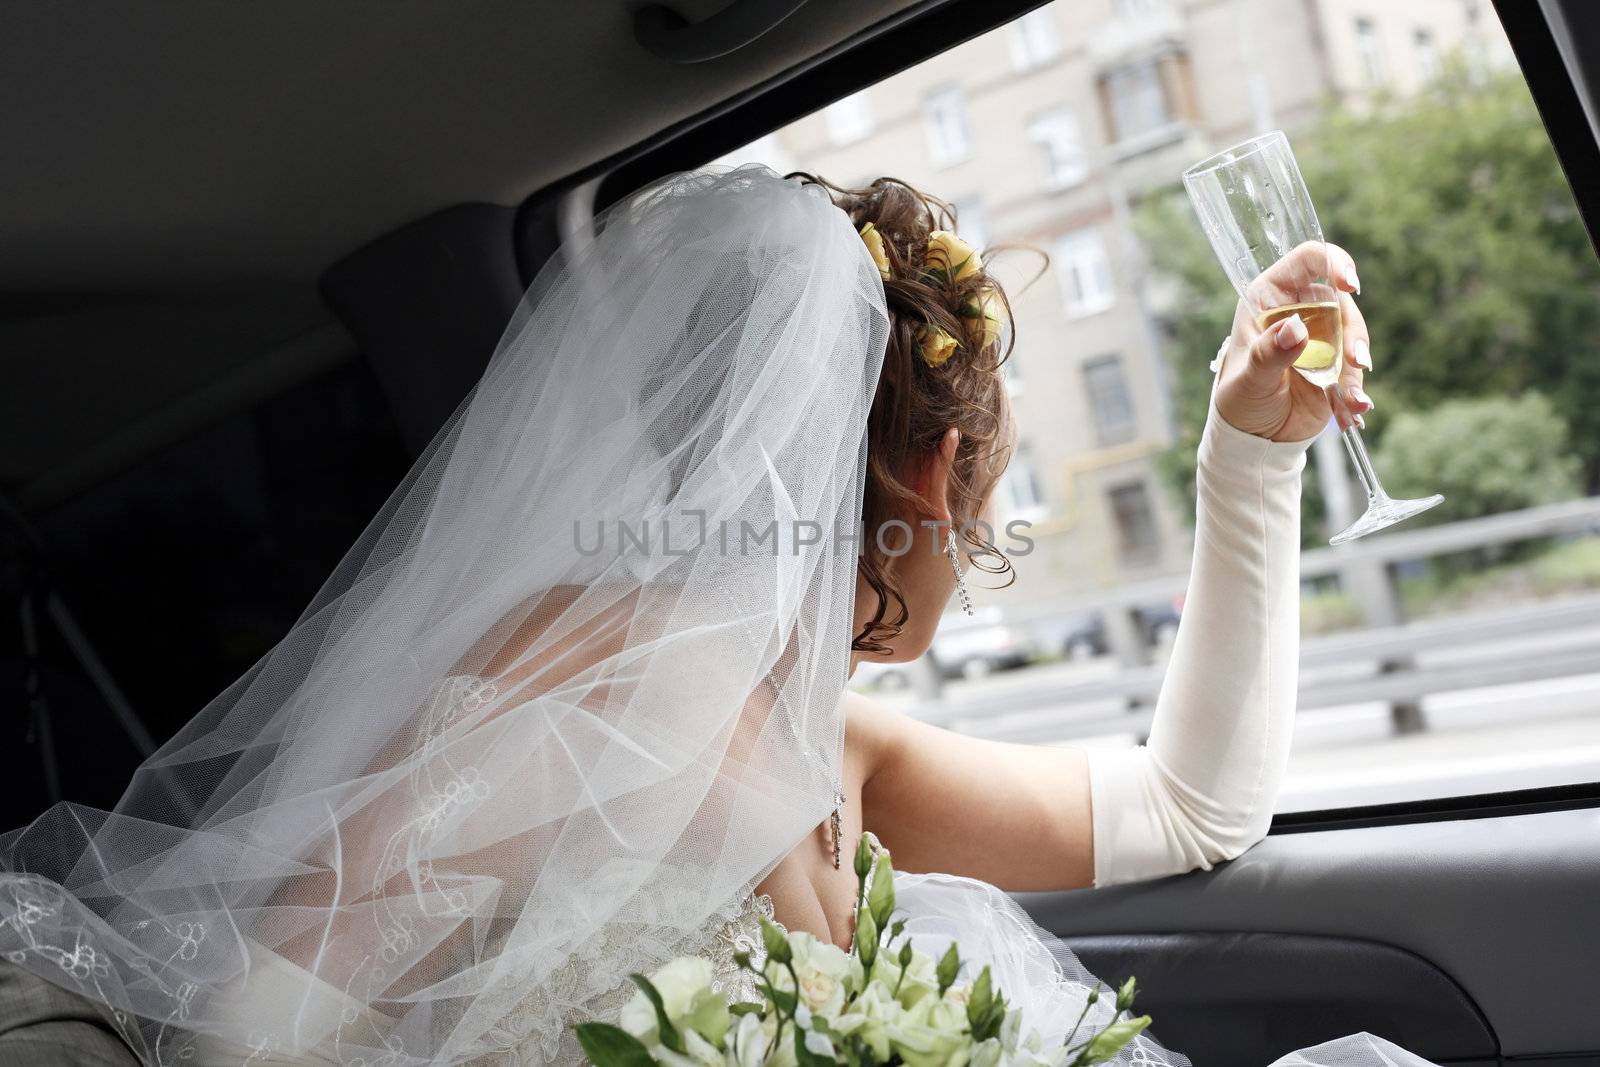 The bride looks in a window of the automobile